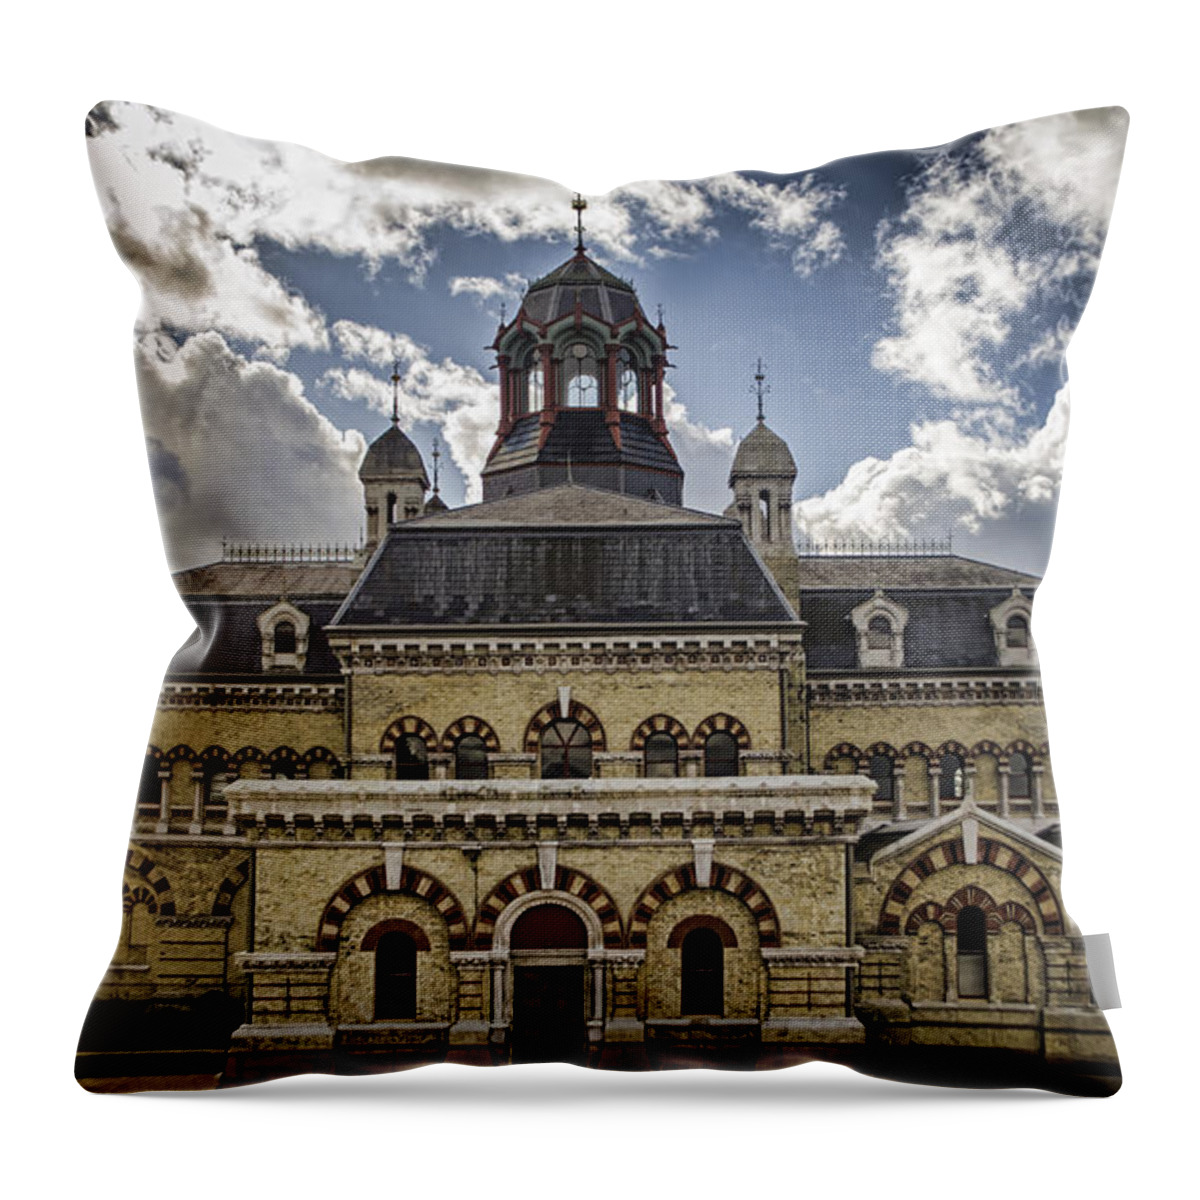 Abbey Mills Throw Pillow featuring the photograph Abbey Mills Pumping Station by Heather Applegate